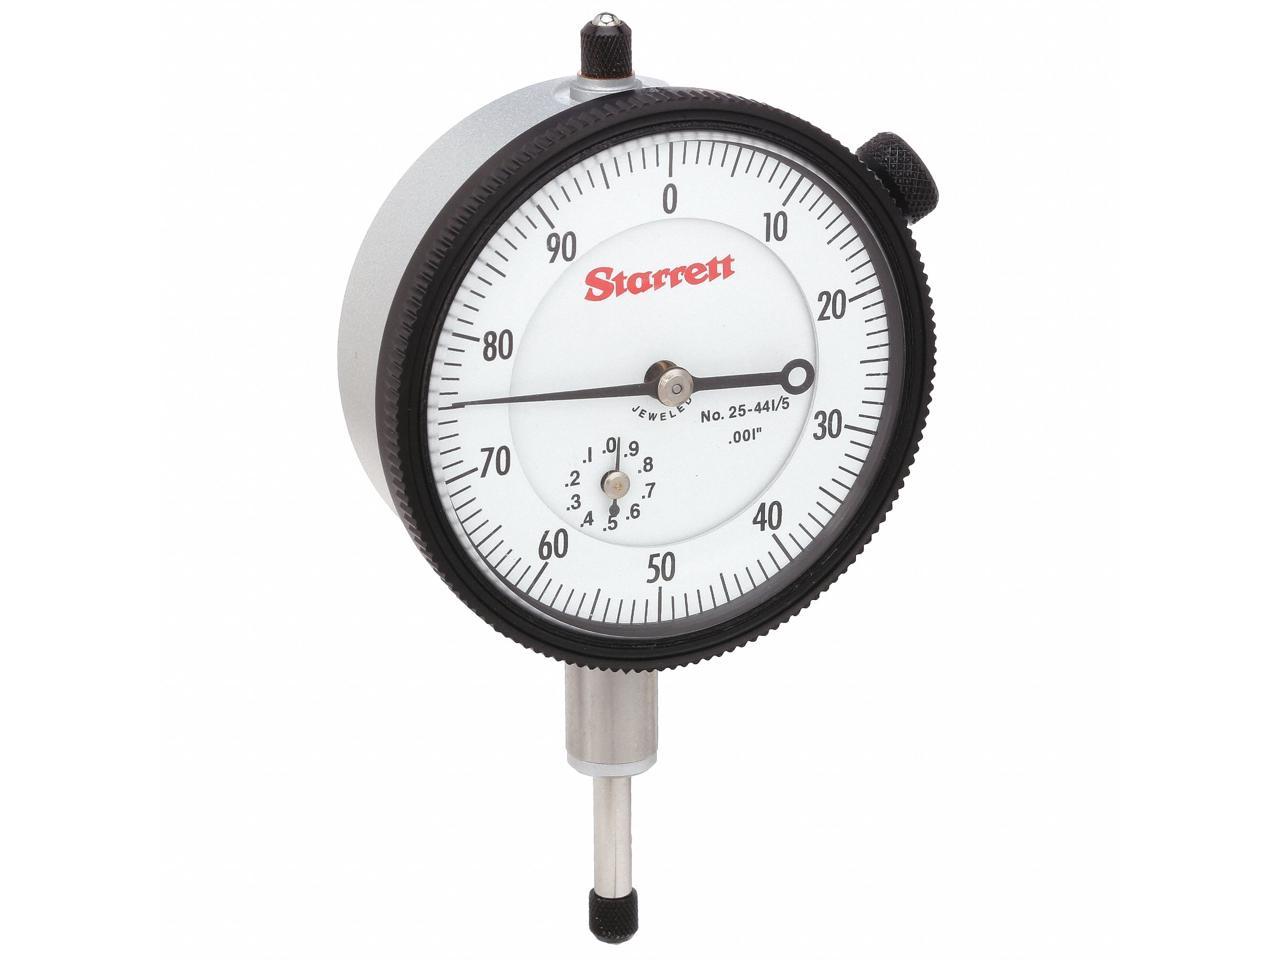 Lever Dial Test Indicator 50‑160mm Dial Test Indicator Accurate Measurement Small Size for Most Working Environments 